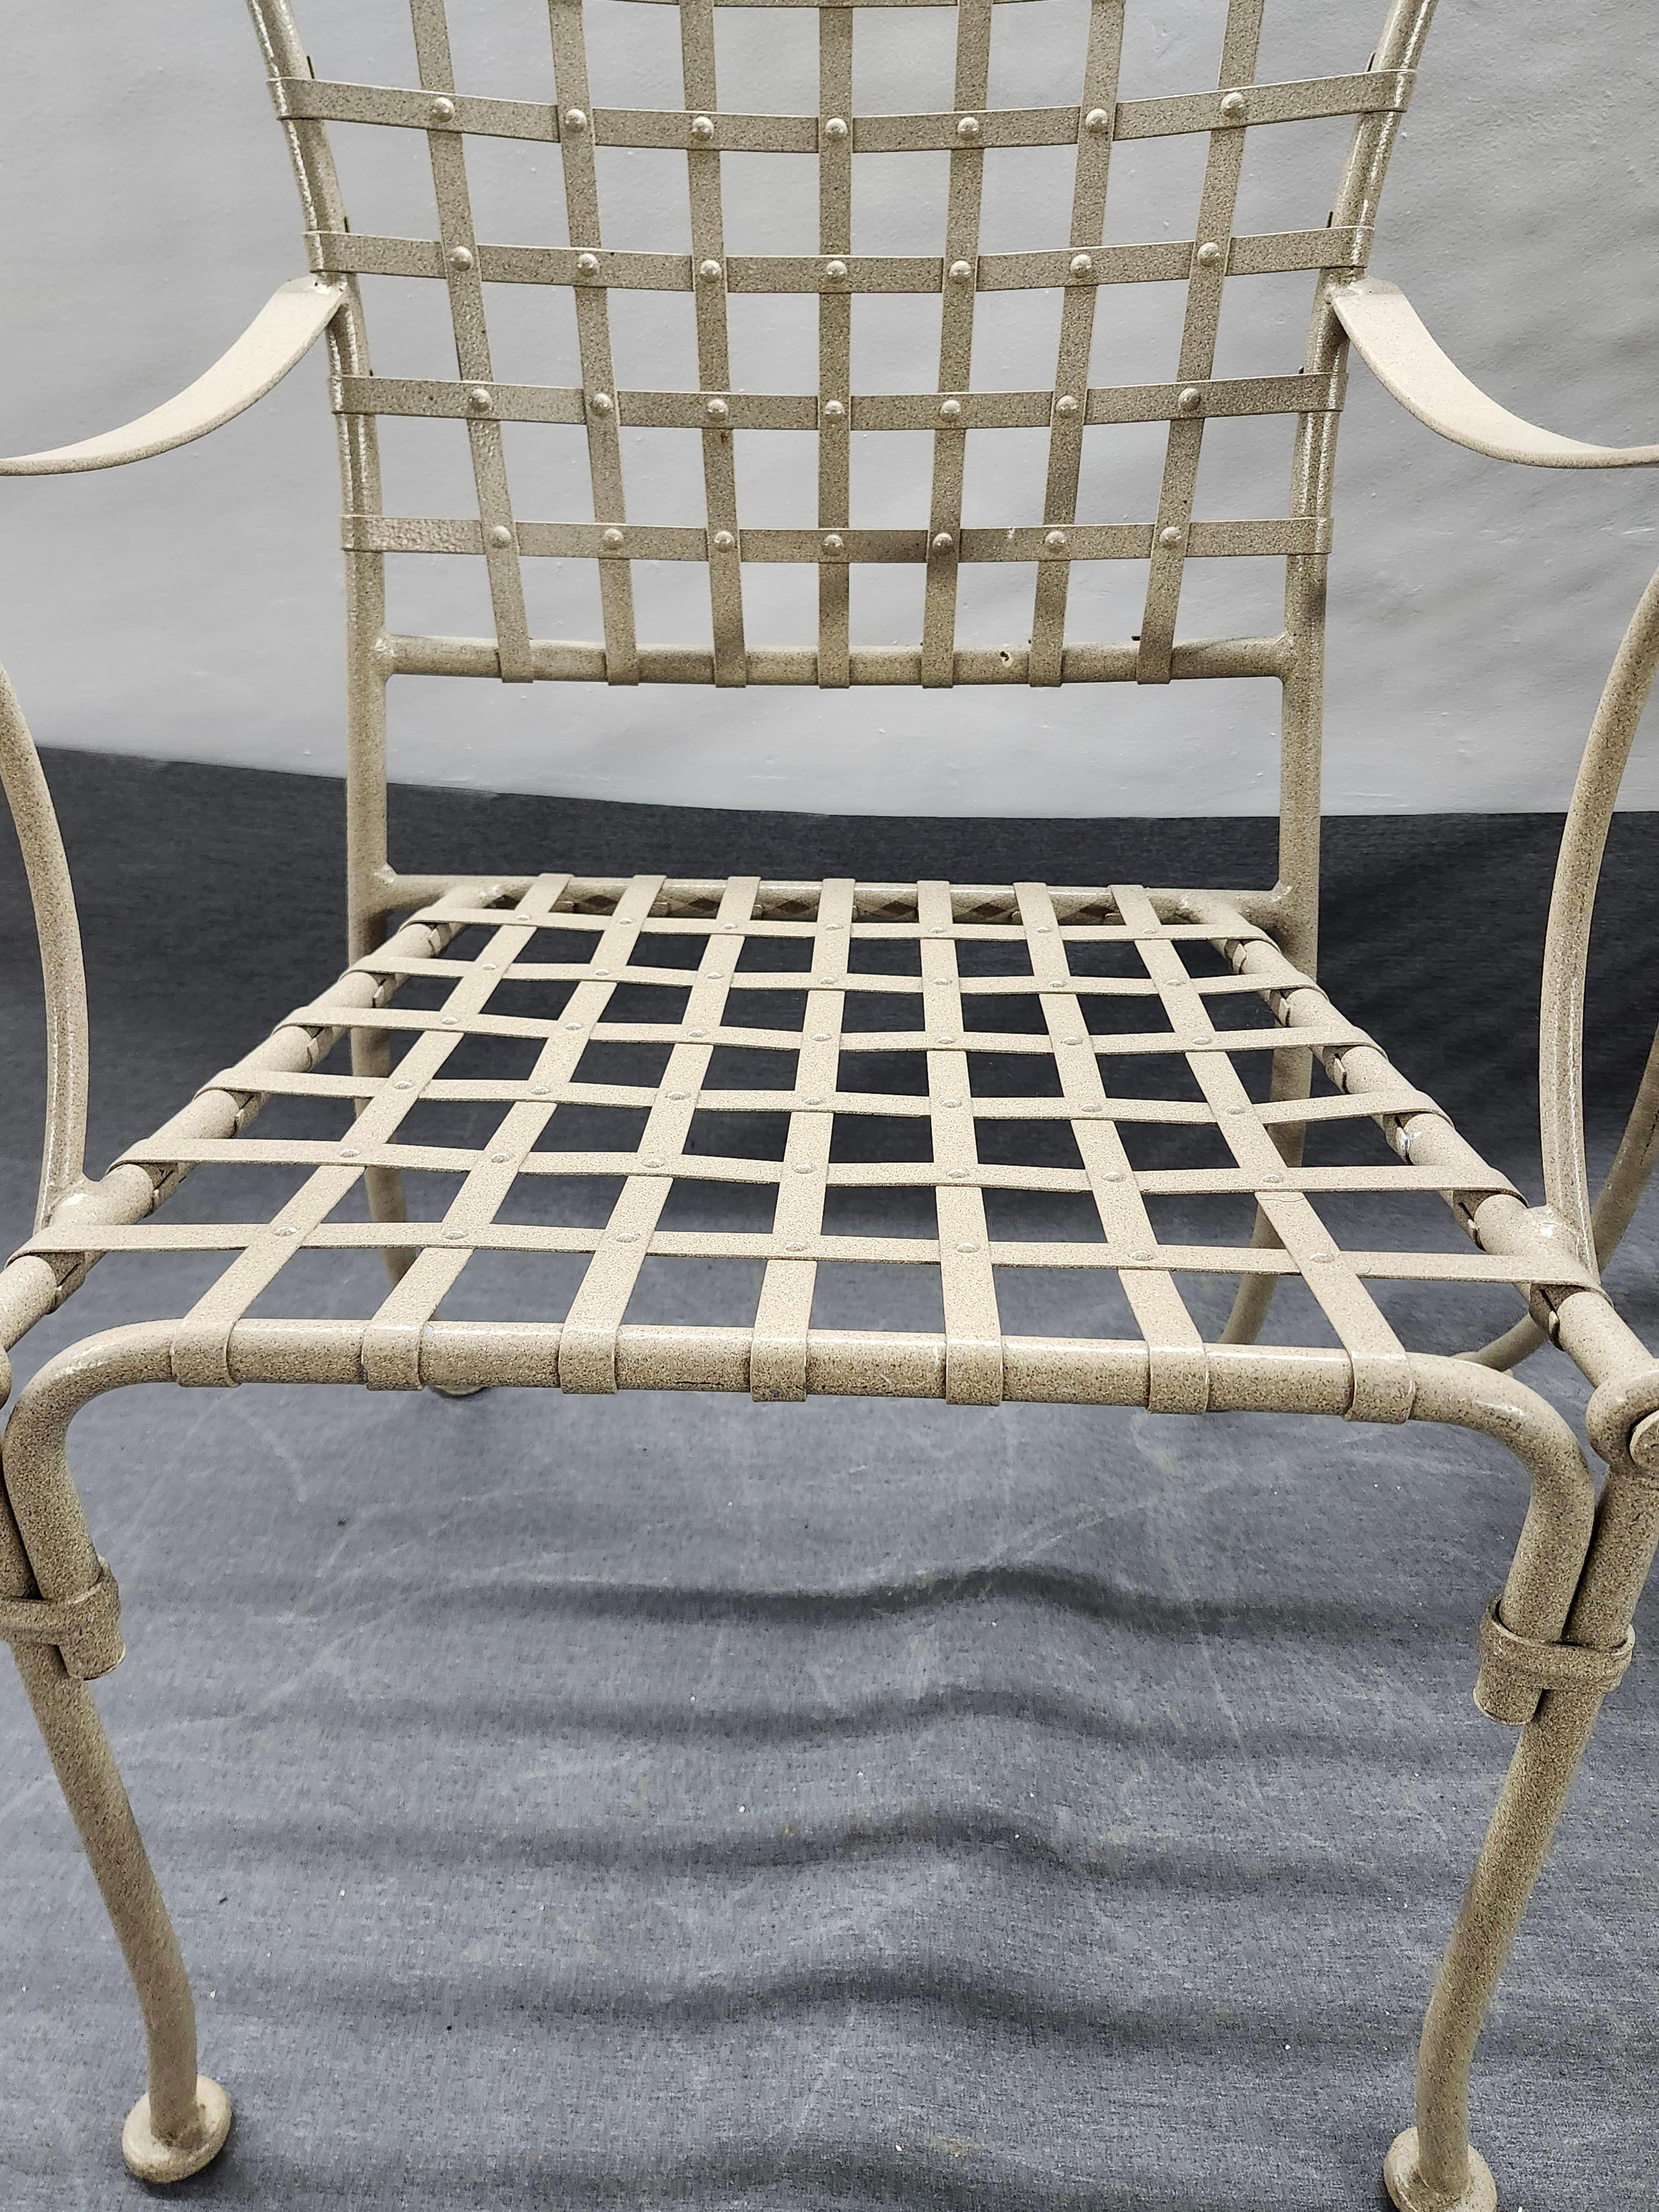 Vintage Wrought Iron Patio Outdoor Chairs In Good Condition For Sale In Cumberland, RI